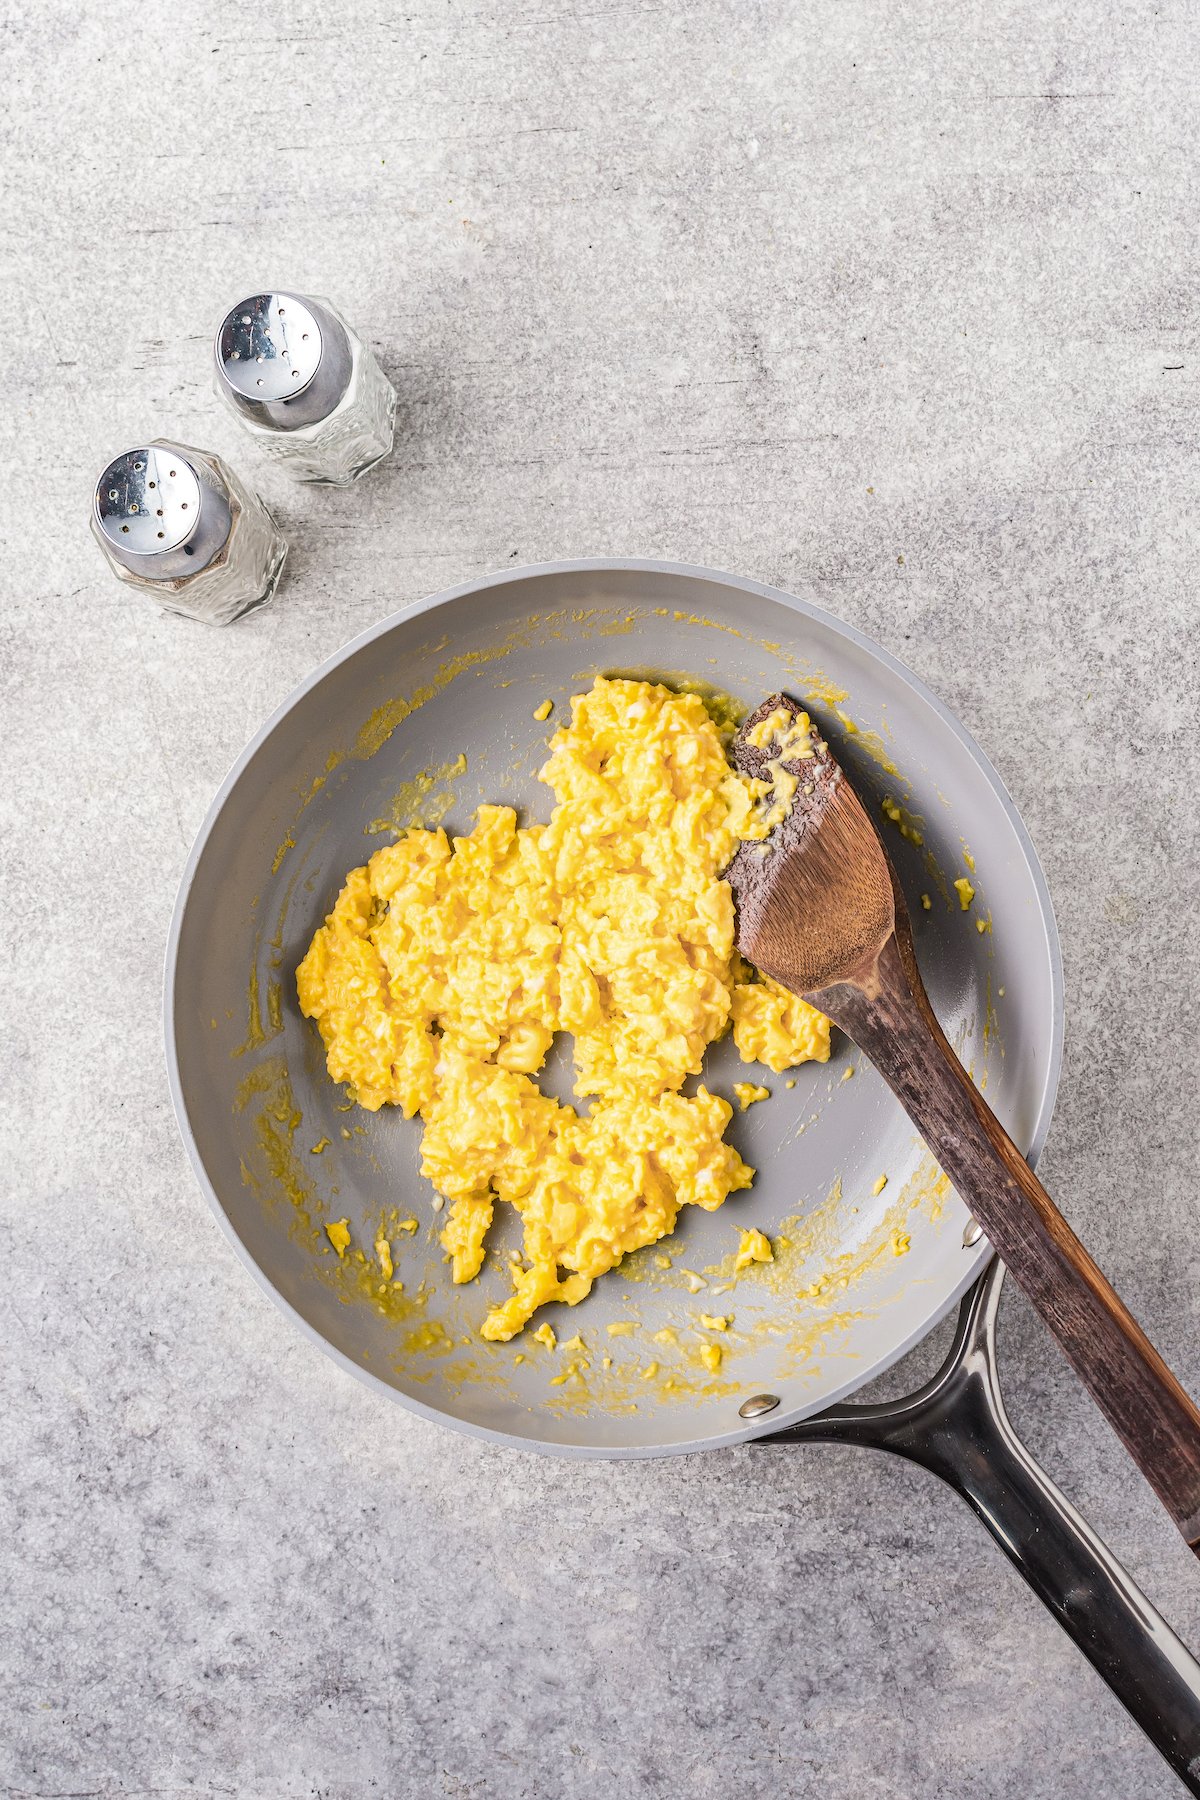 A wooden spatula is used to scramble eggs in a skillet as they cook.